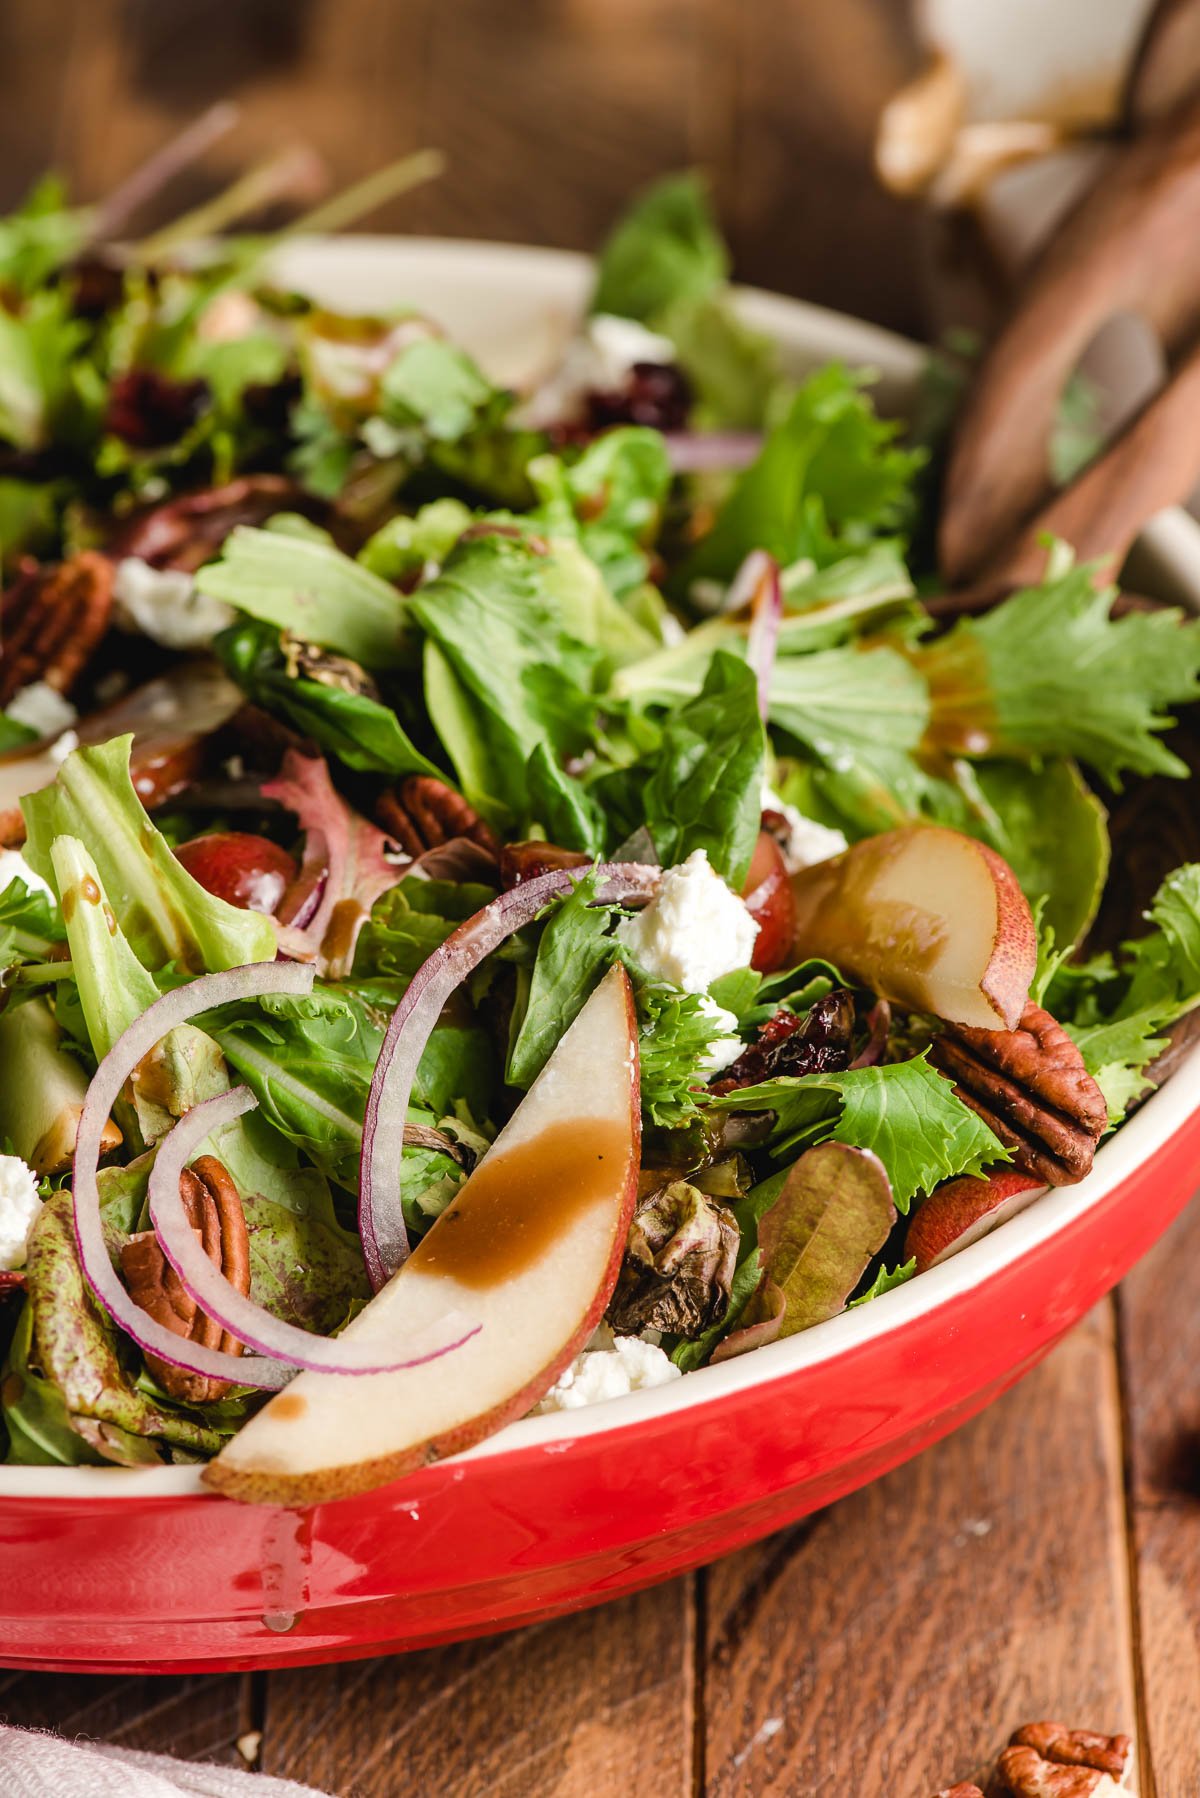 Salad with pear slices, red onion, and maple vinaigrette.